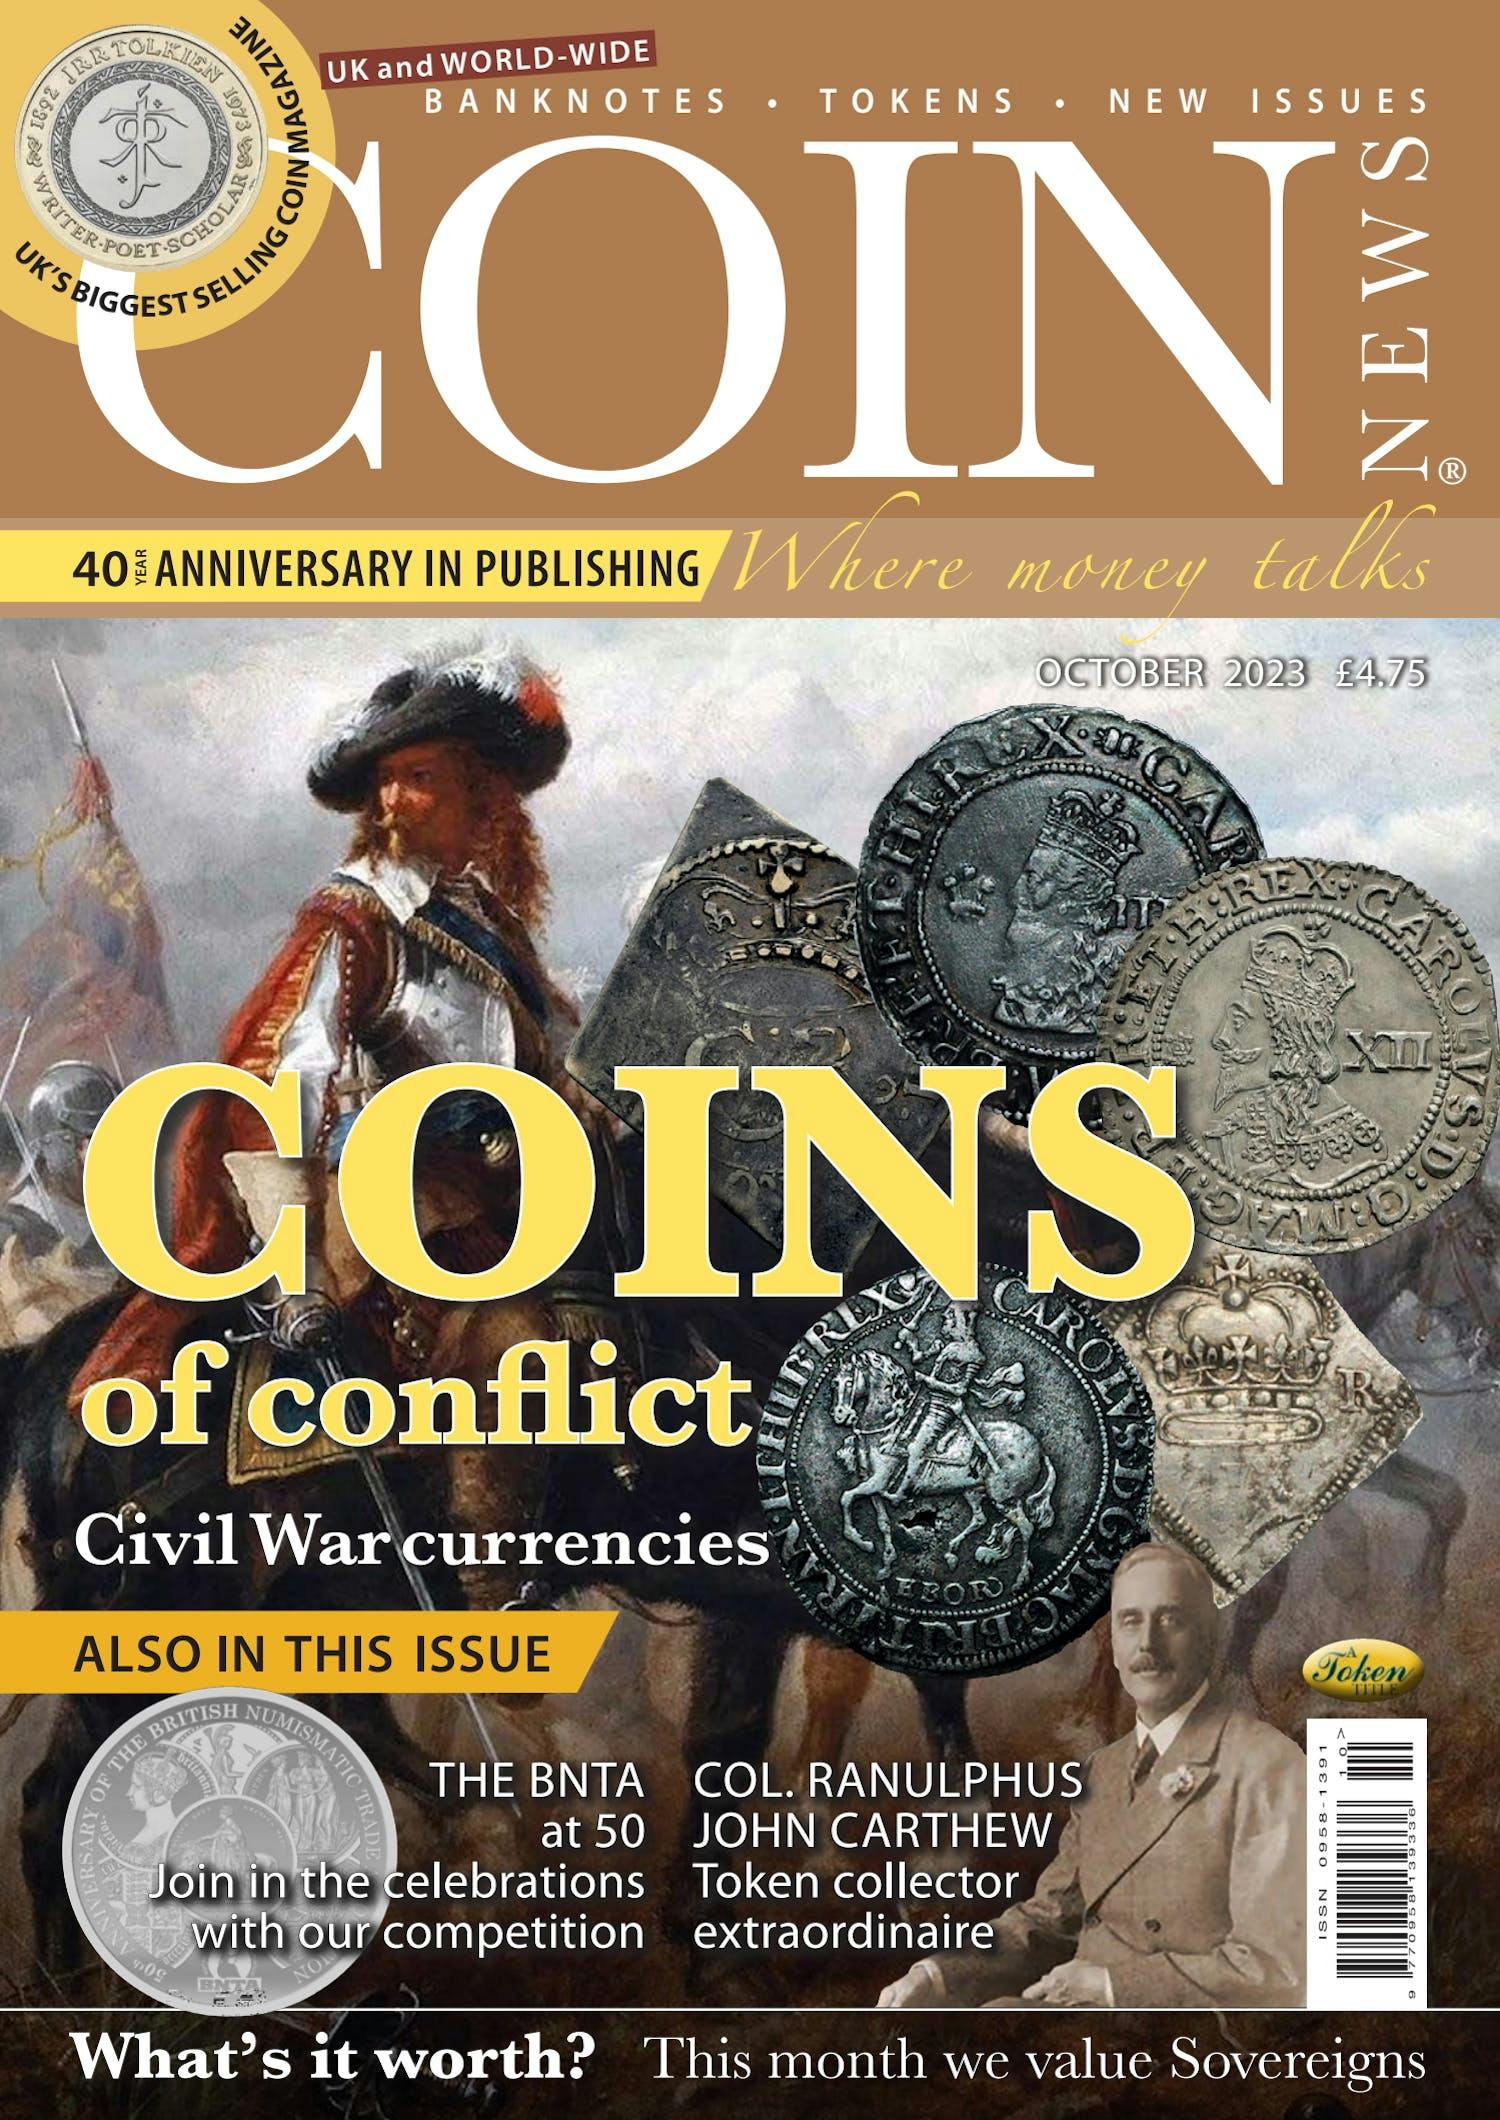 The front cover of Coin News, Volume 60, Number 10, October 2023